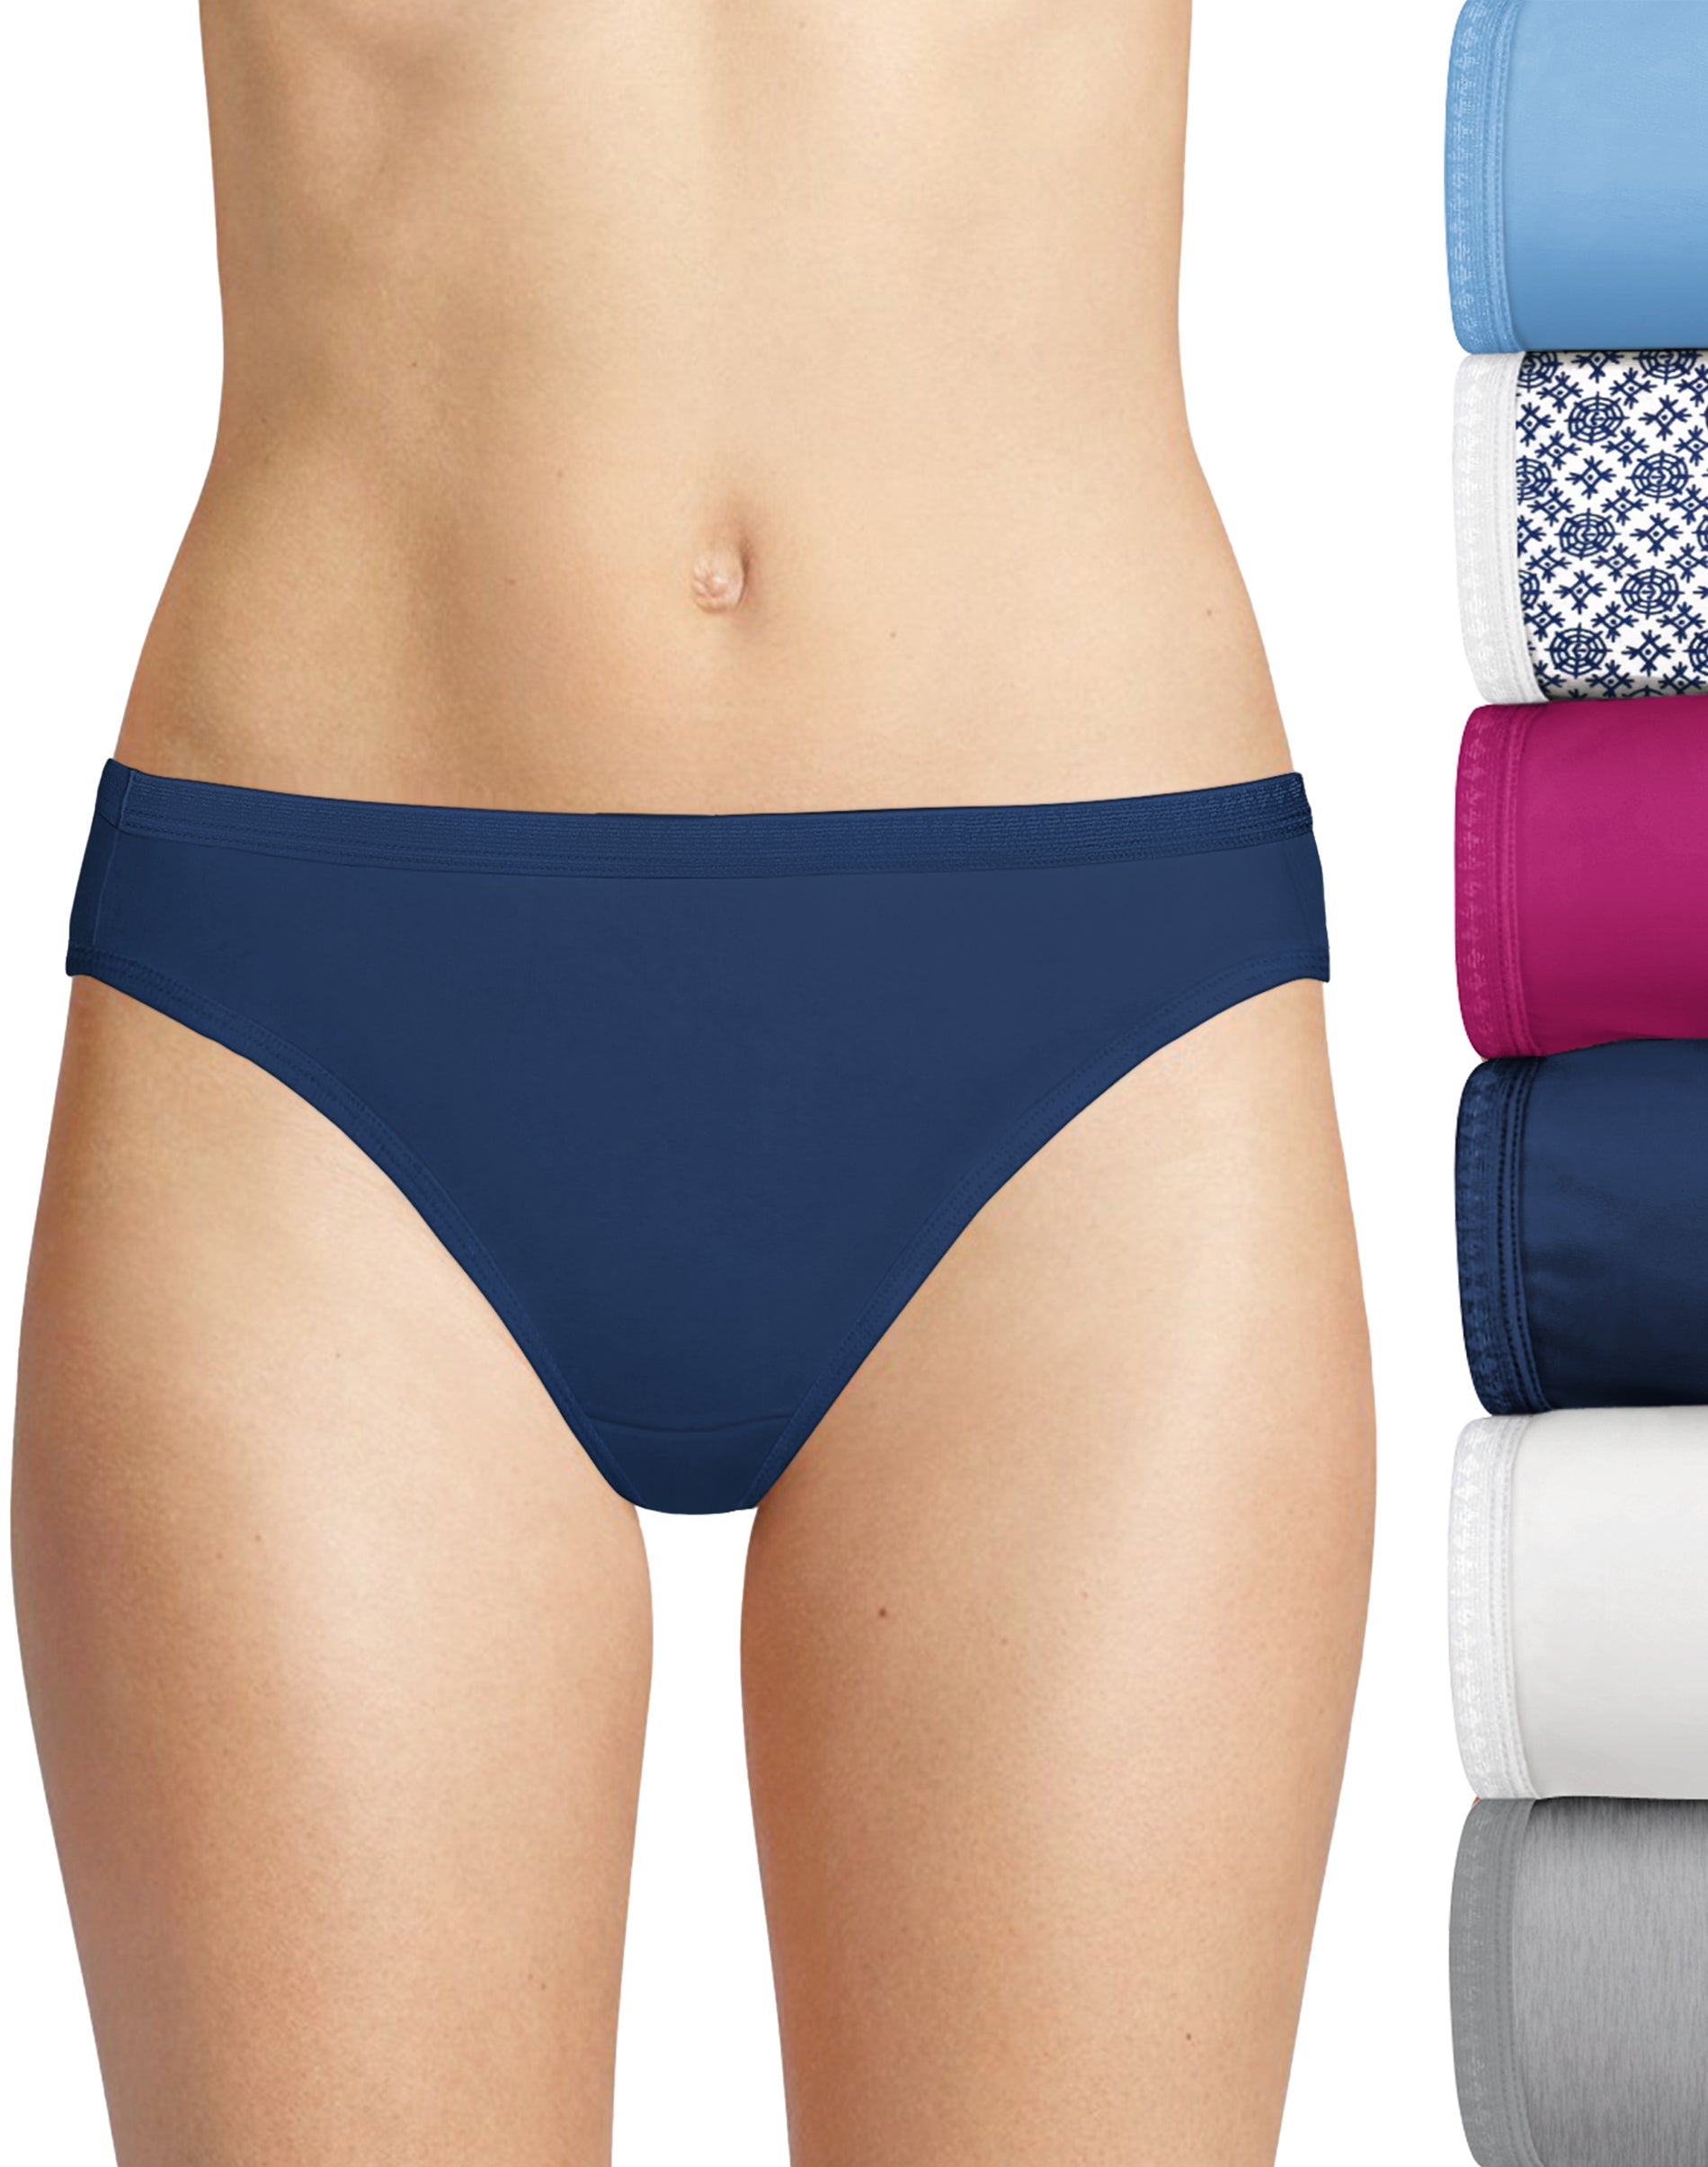 Hanes Women's No Ride Up Low Rise Cotton Brief 6-Pack at